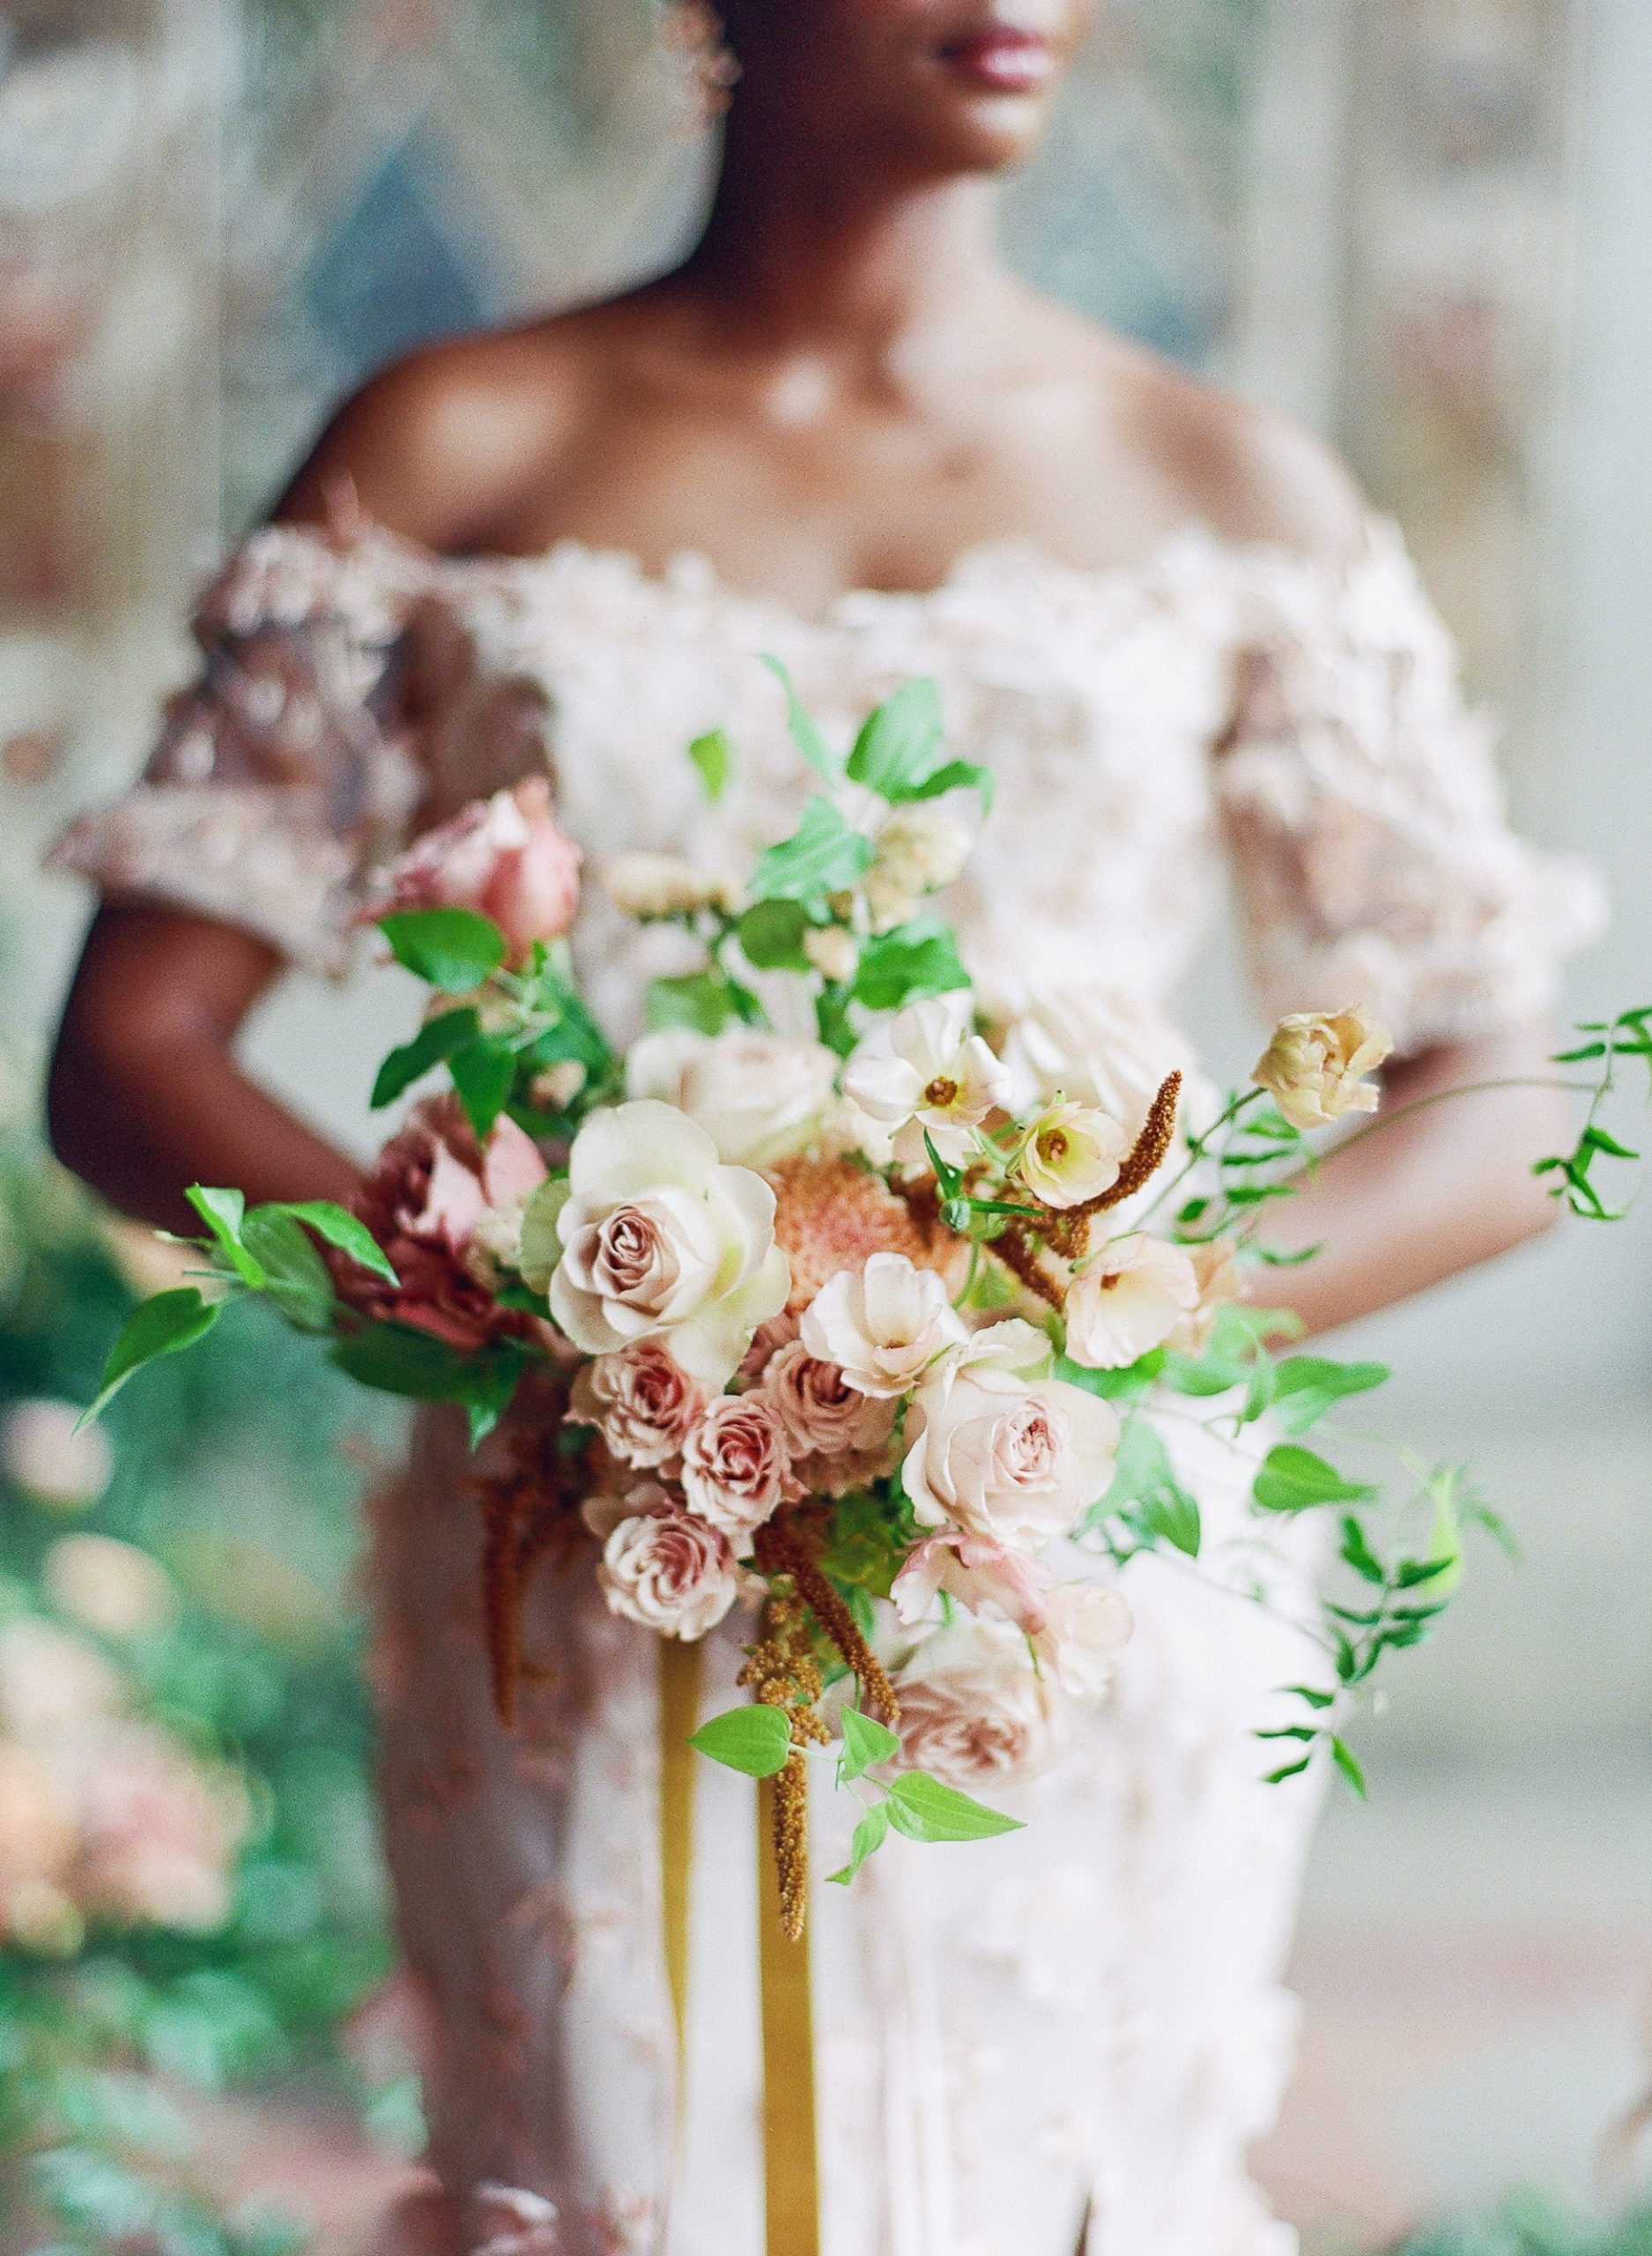 Bride holding pink and white bridal bouquet photo